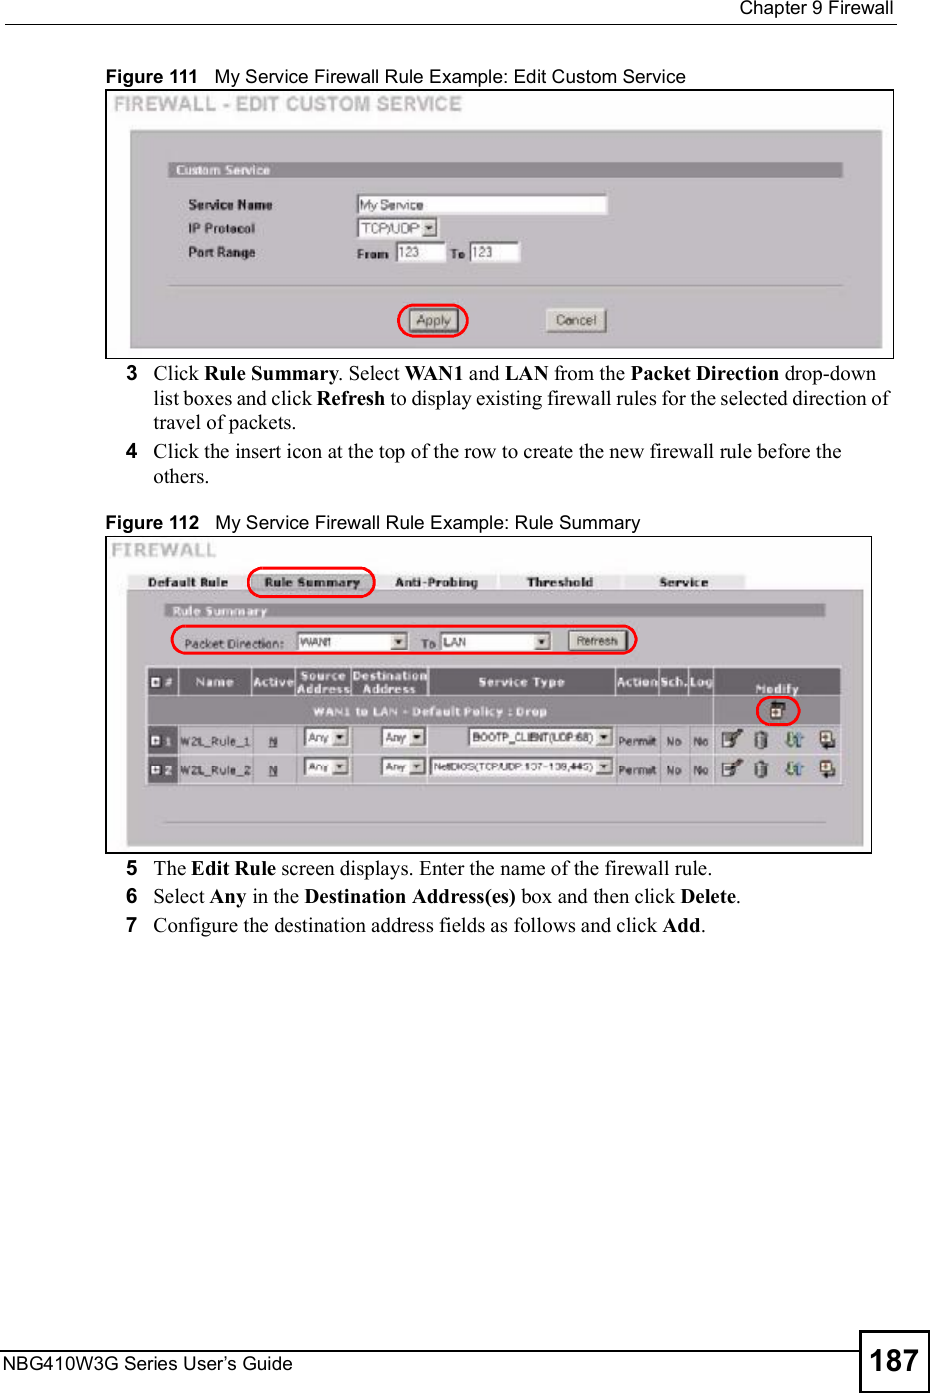  Chapter 9FirewallNBG410W3G Series User s Guide 187Figure 111   My Service Firewall Rule Example: Edit Custom Service 3Click Rule Summary. Select WAN1 and LAN from the Packet Direction drop-down list boxes and click Refresh to display existing firewall rules for the selected direction of travel of packets.4Click the insert icon at the top of the row to create the new firewall rule before the others.Figure 112   My Service Firewall Rule Example: Rule Summary5The Edit Rule screen displays. Enter the name of the firewall rule.6Select Any in the Destination Address(es) box and then click Delete.7Configure the destination address fields as follows and click Add.